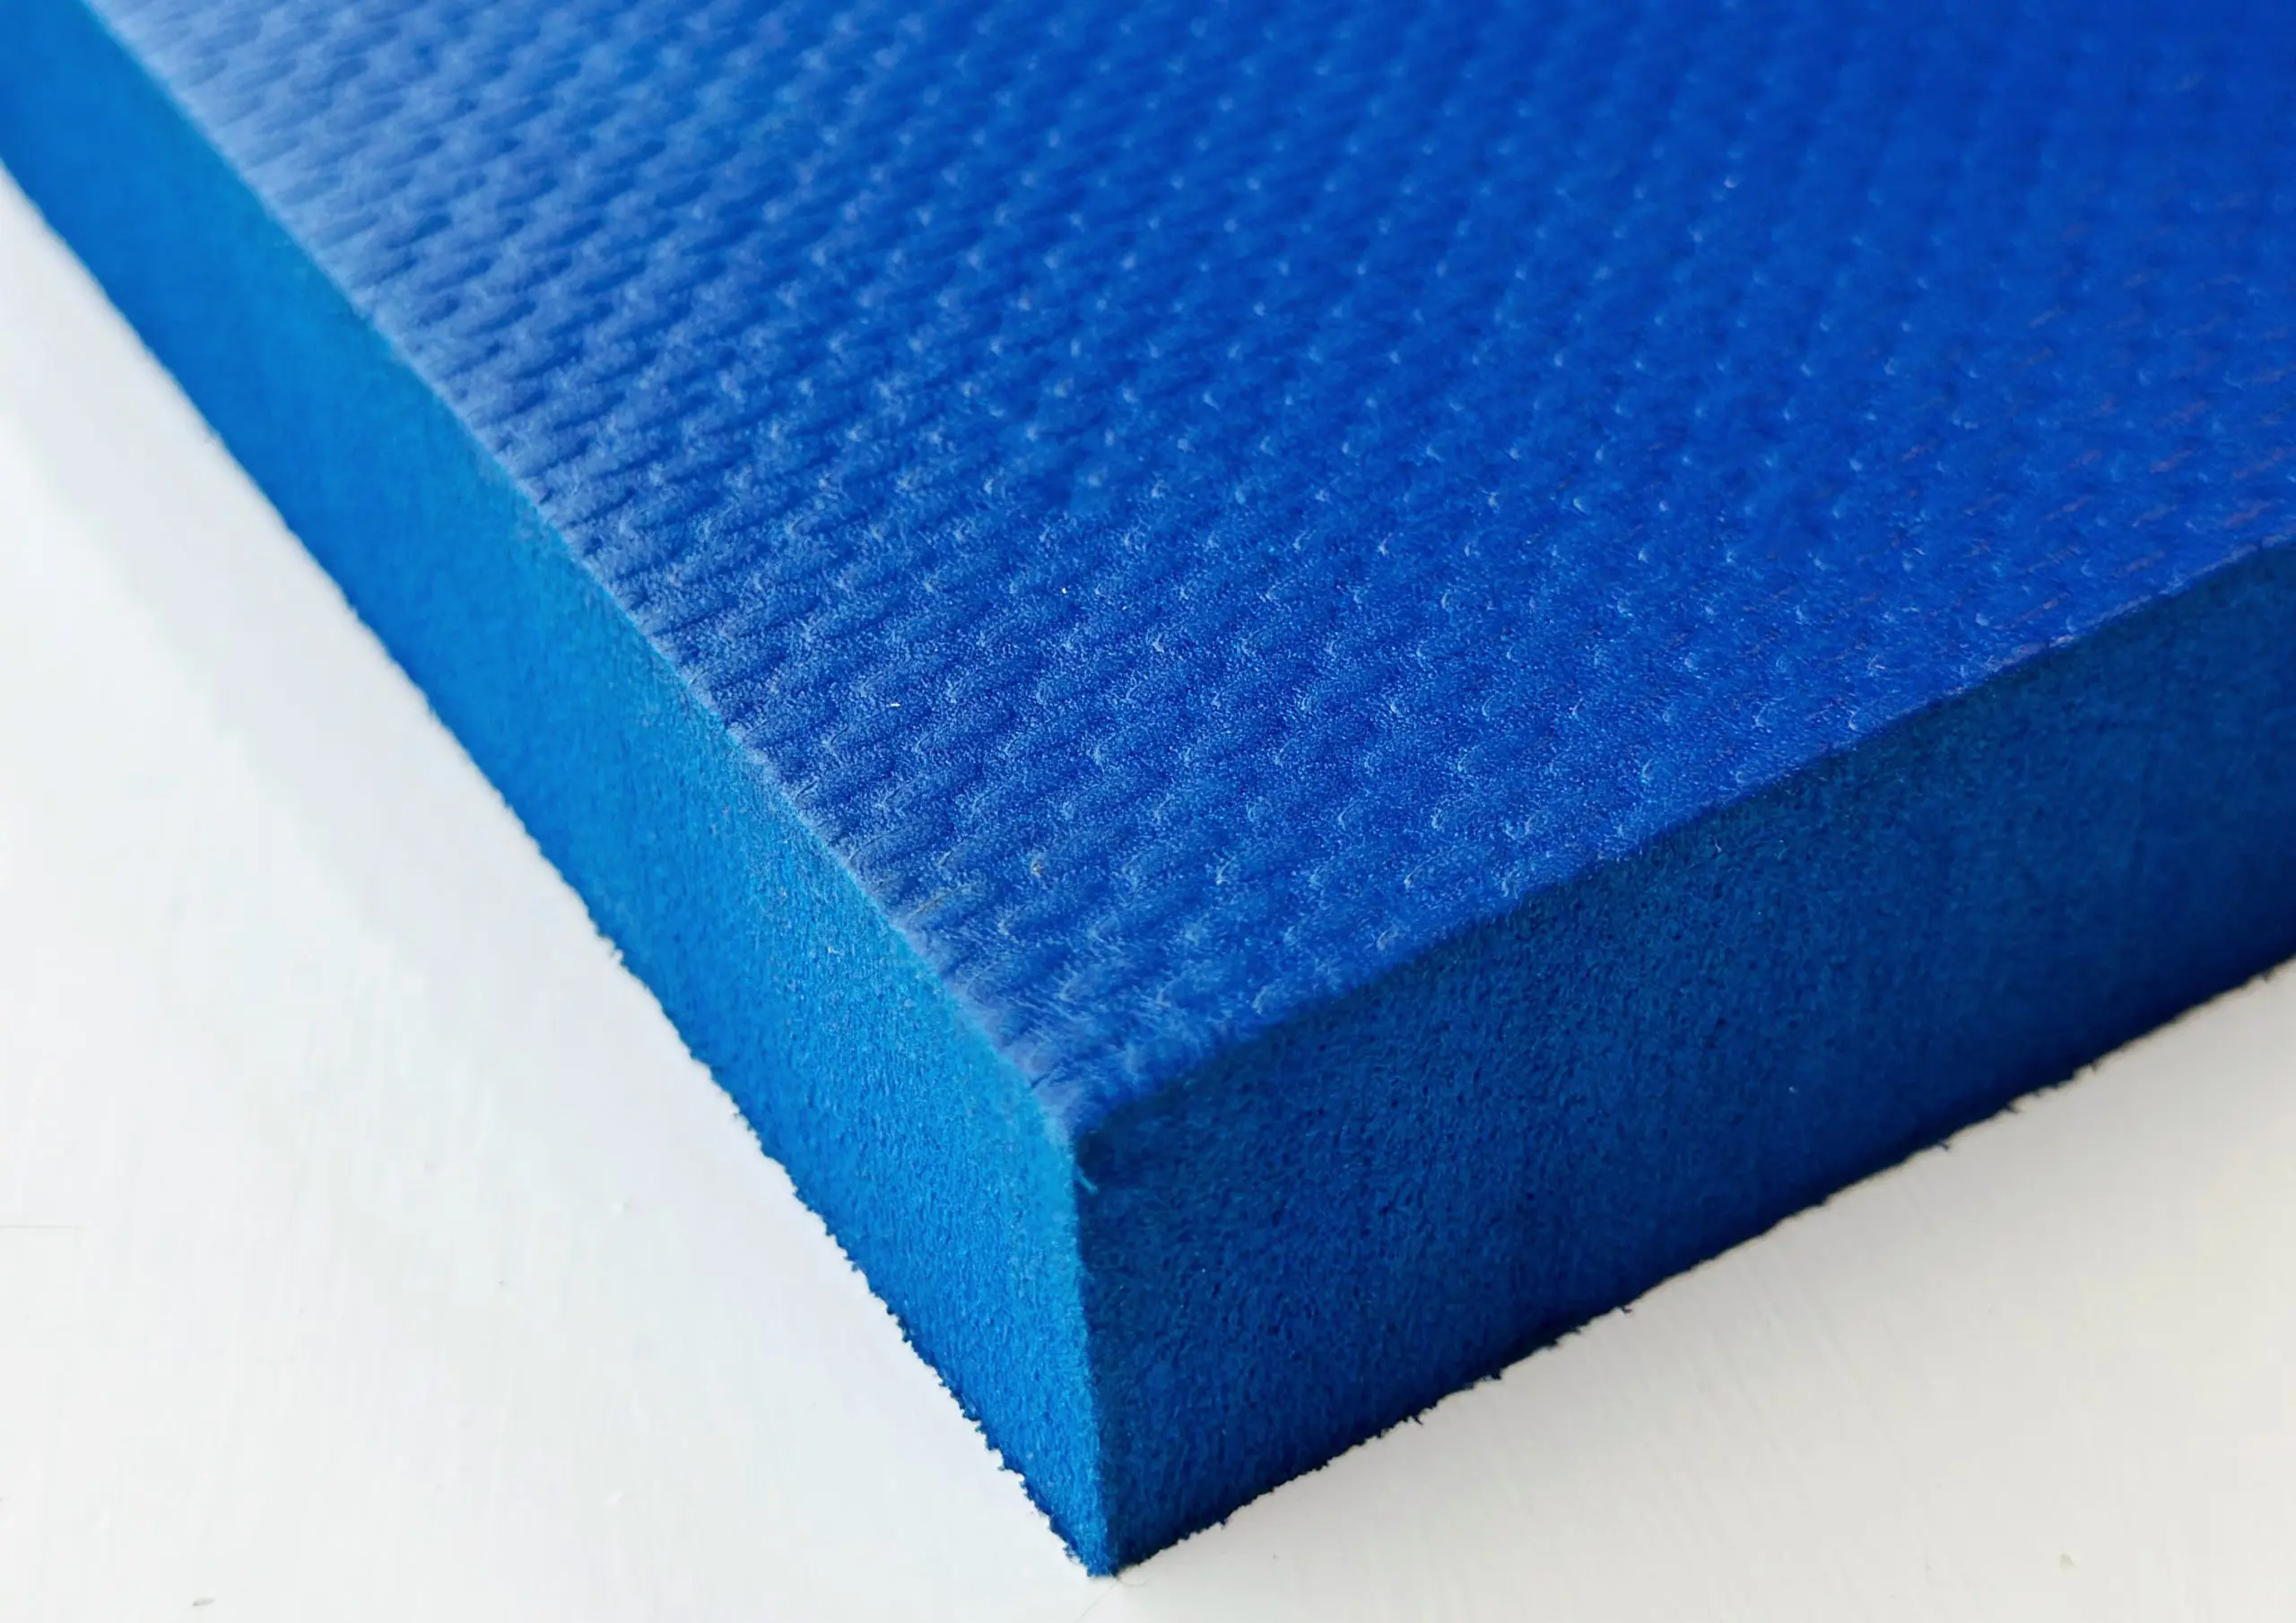 eva foam is soft and kind to skin, so its frequently used in sport and leisure